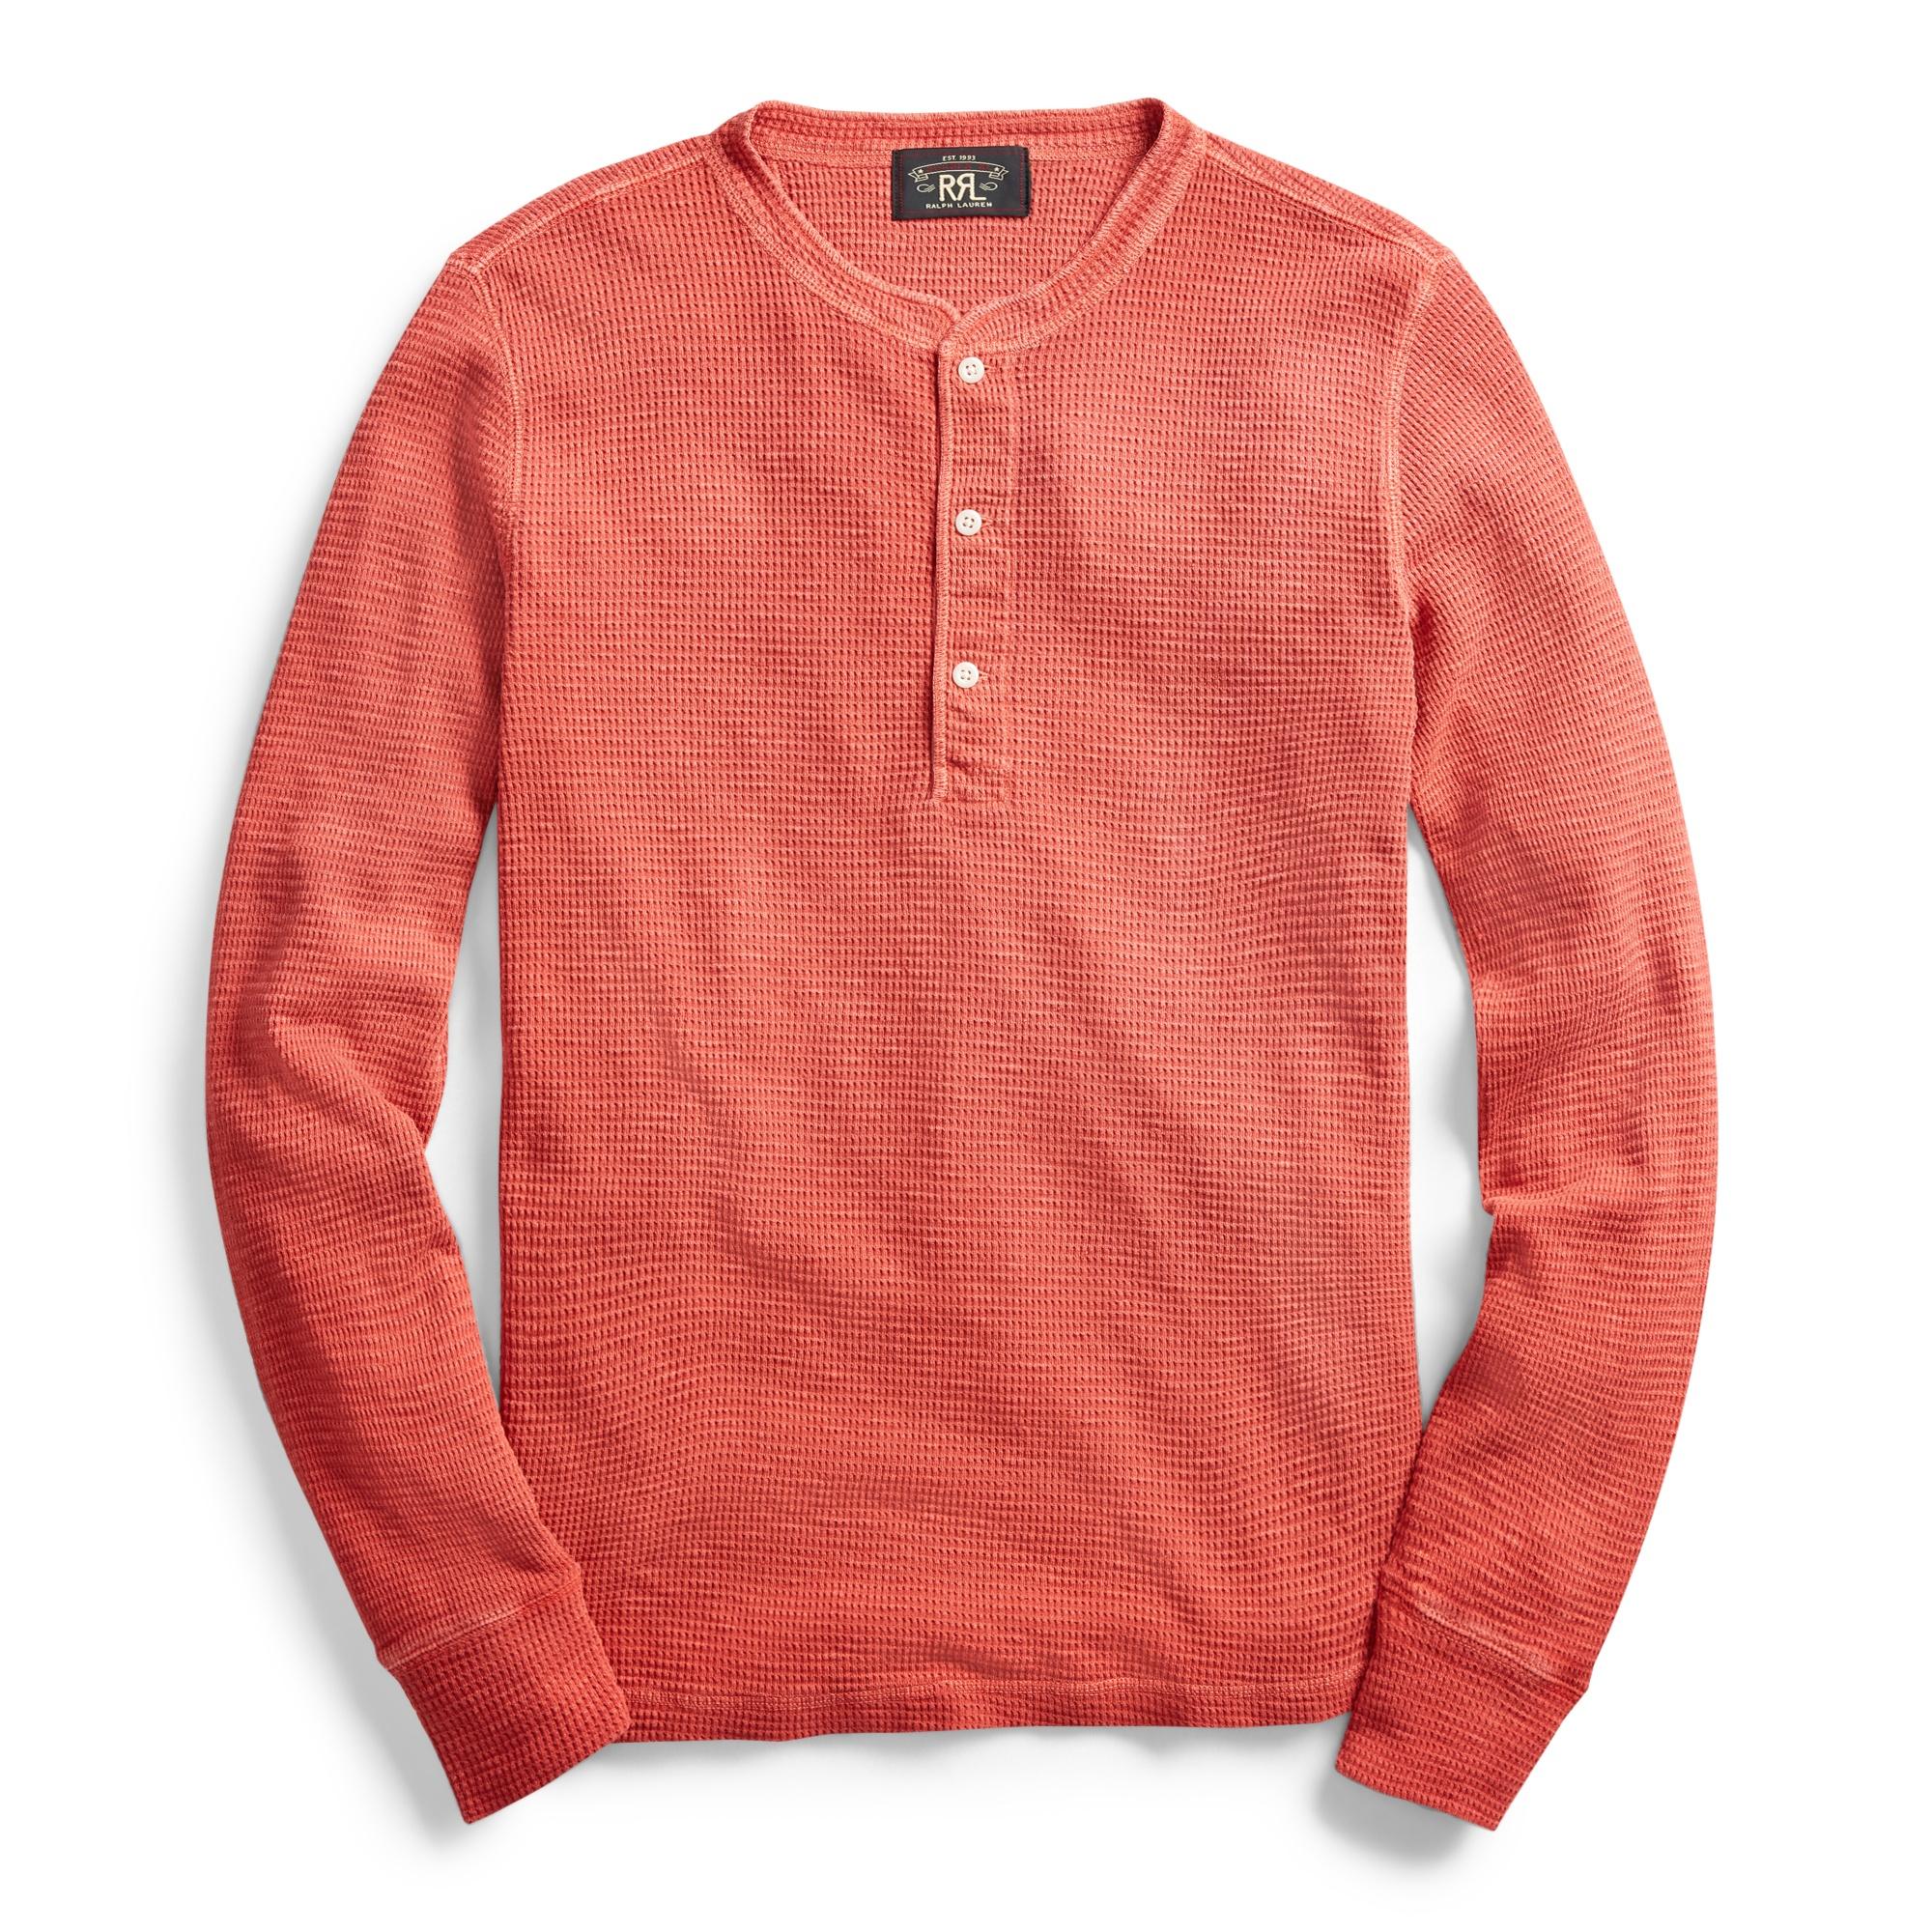 RRL Cotton Waffle-knit Henley Shirt in Red for Men - Lyst